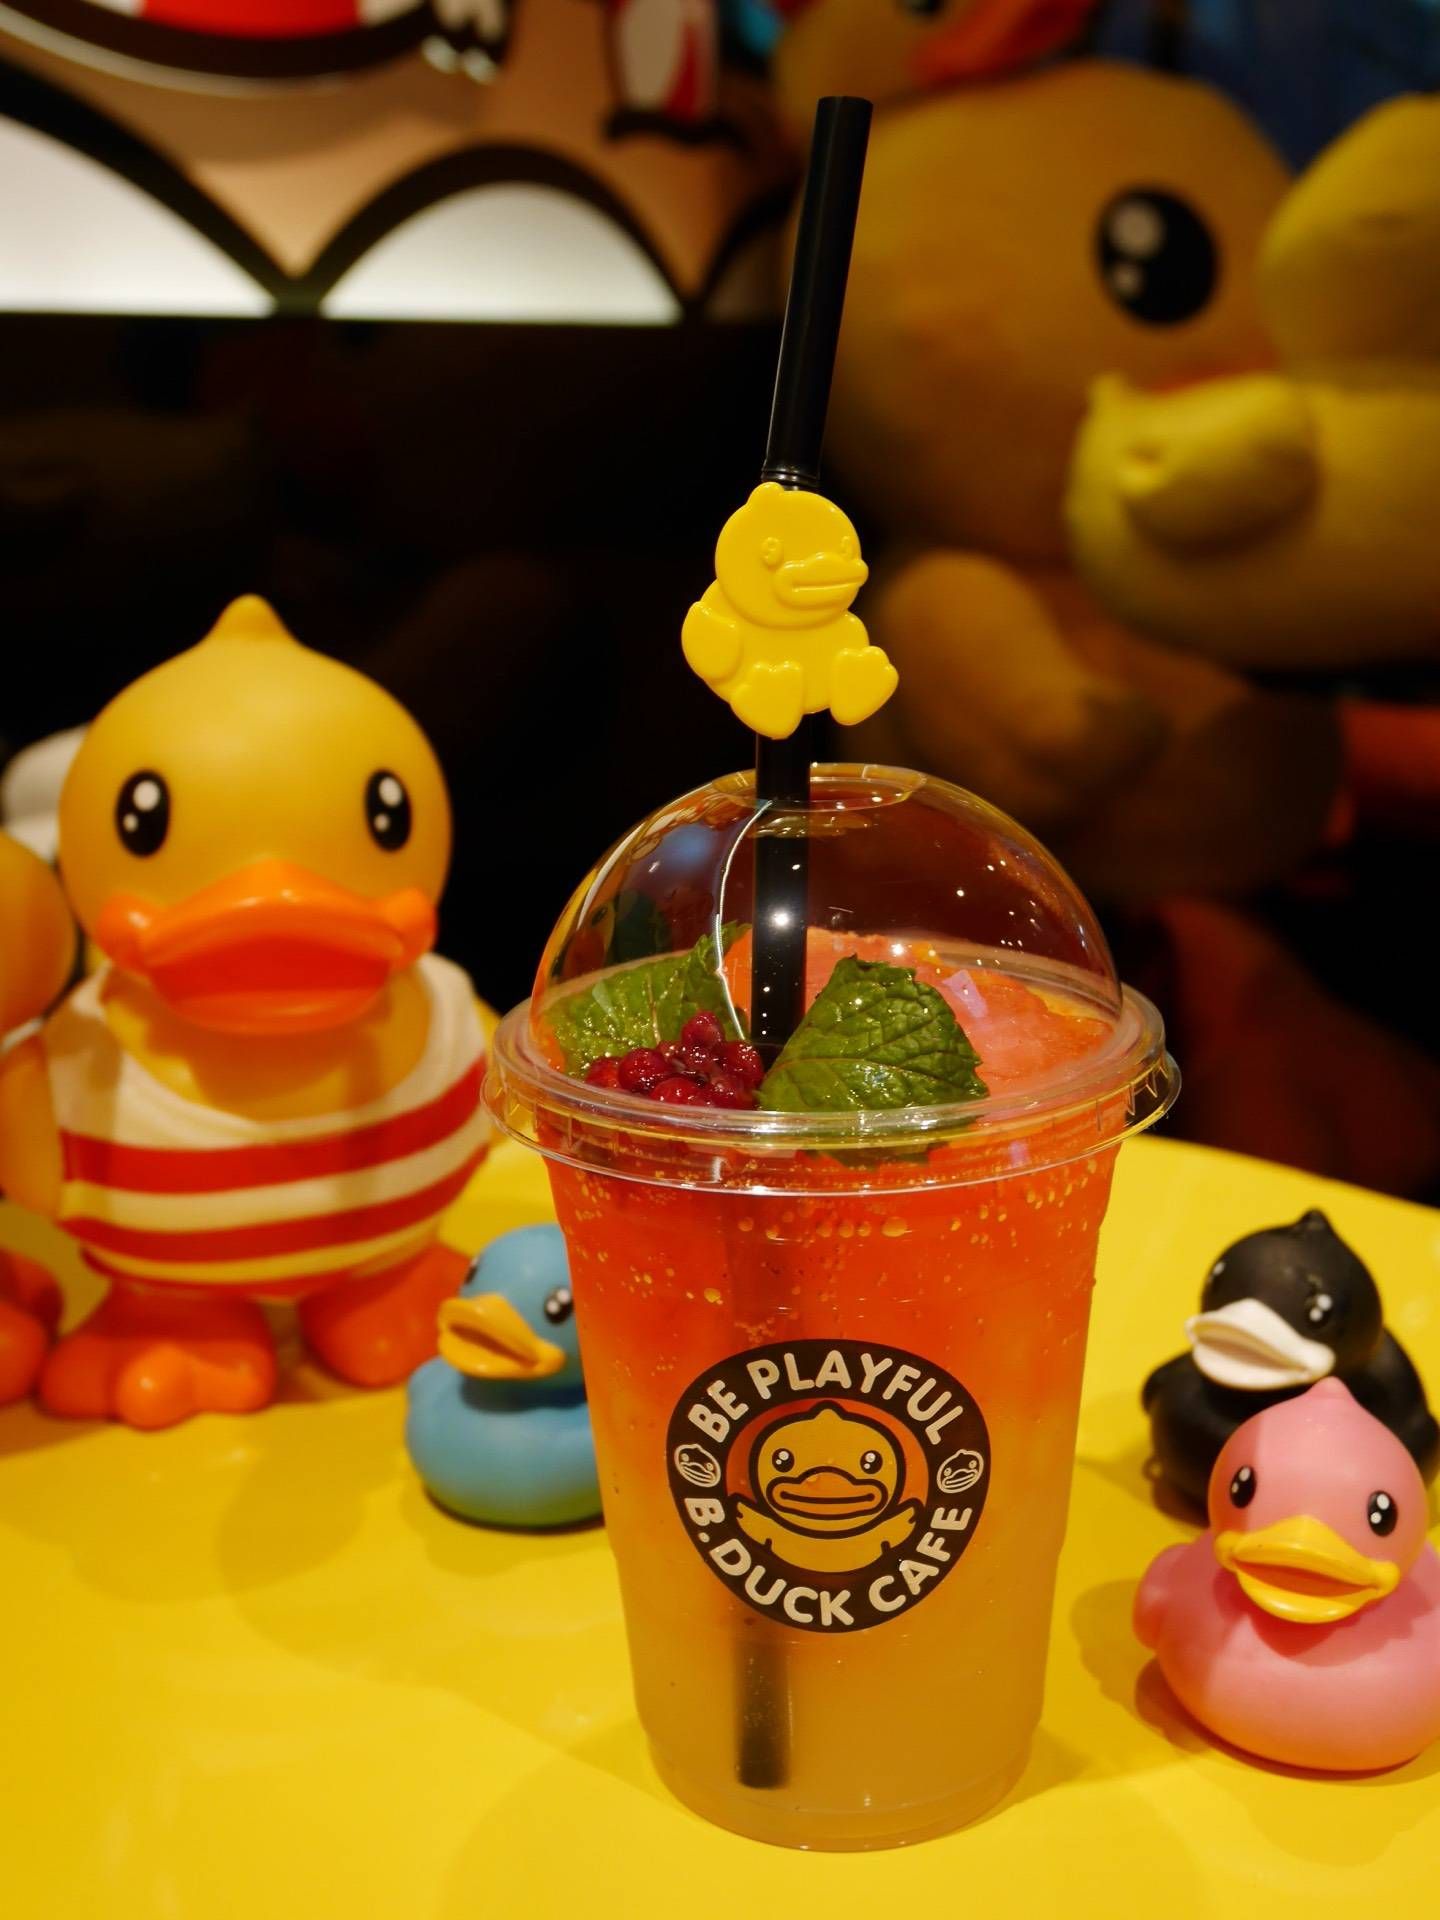 B.Duck cafe